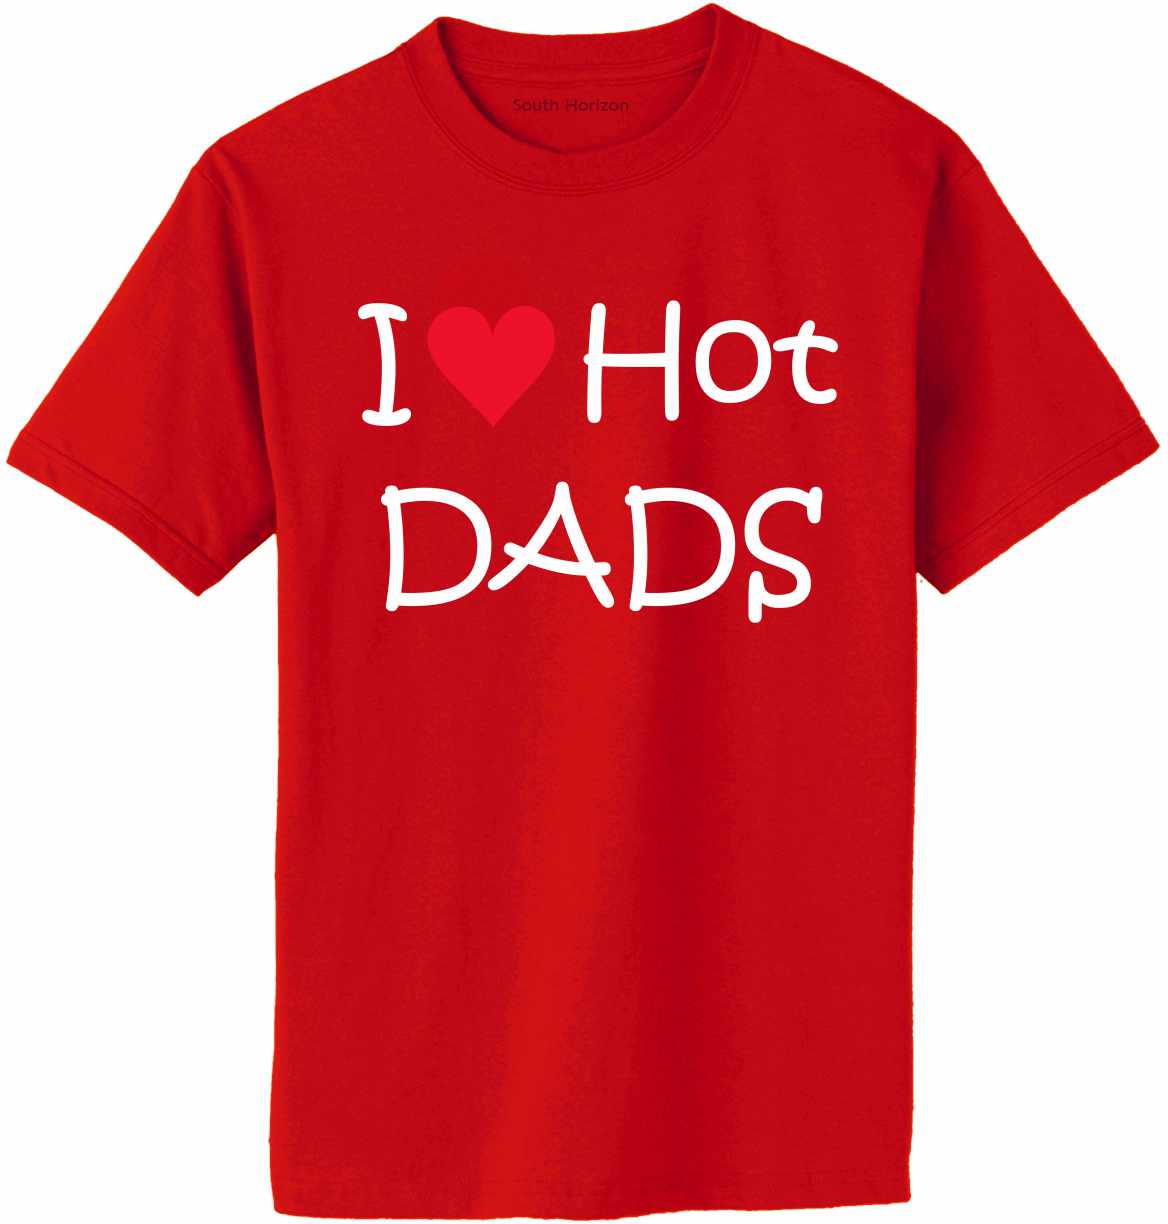 I Love Hot Dads on Adult T-Shirt (#1230-1)